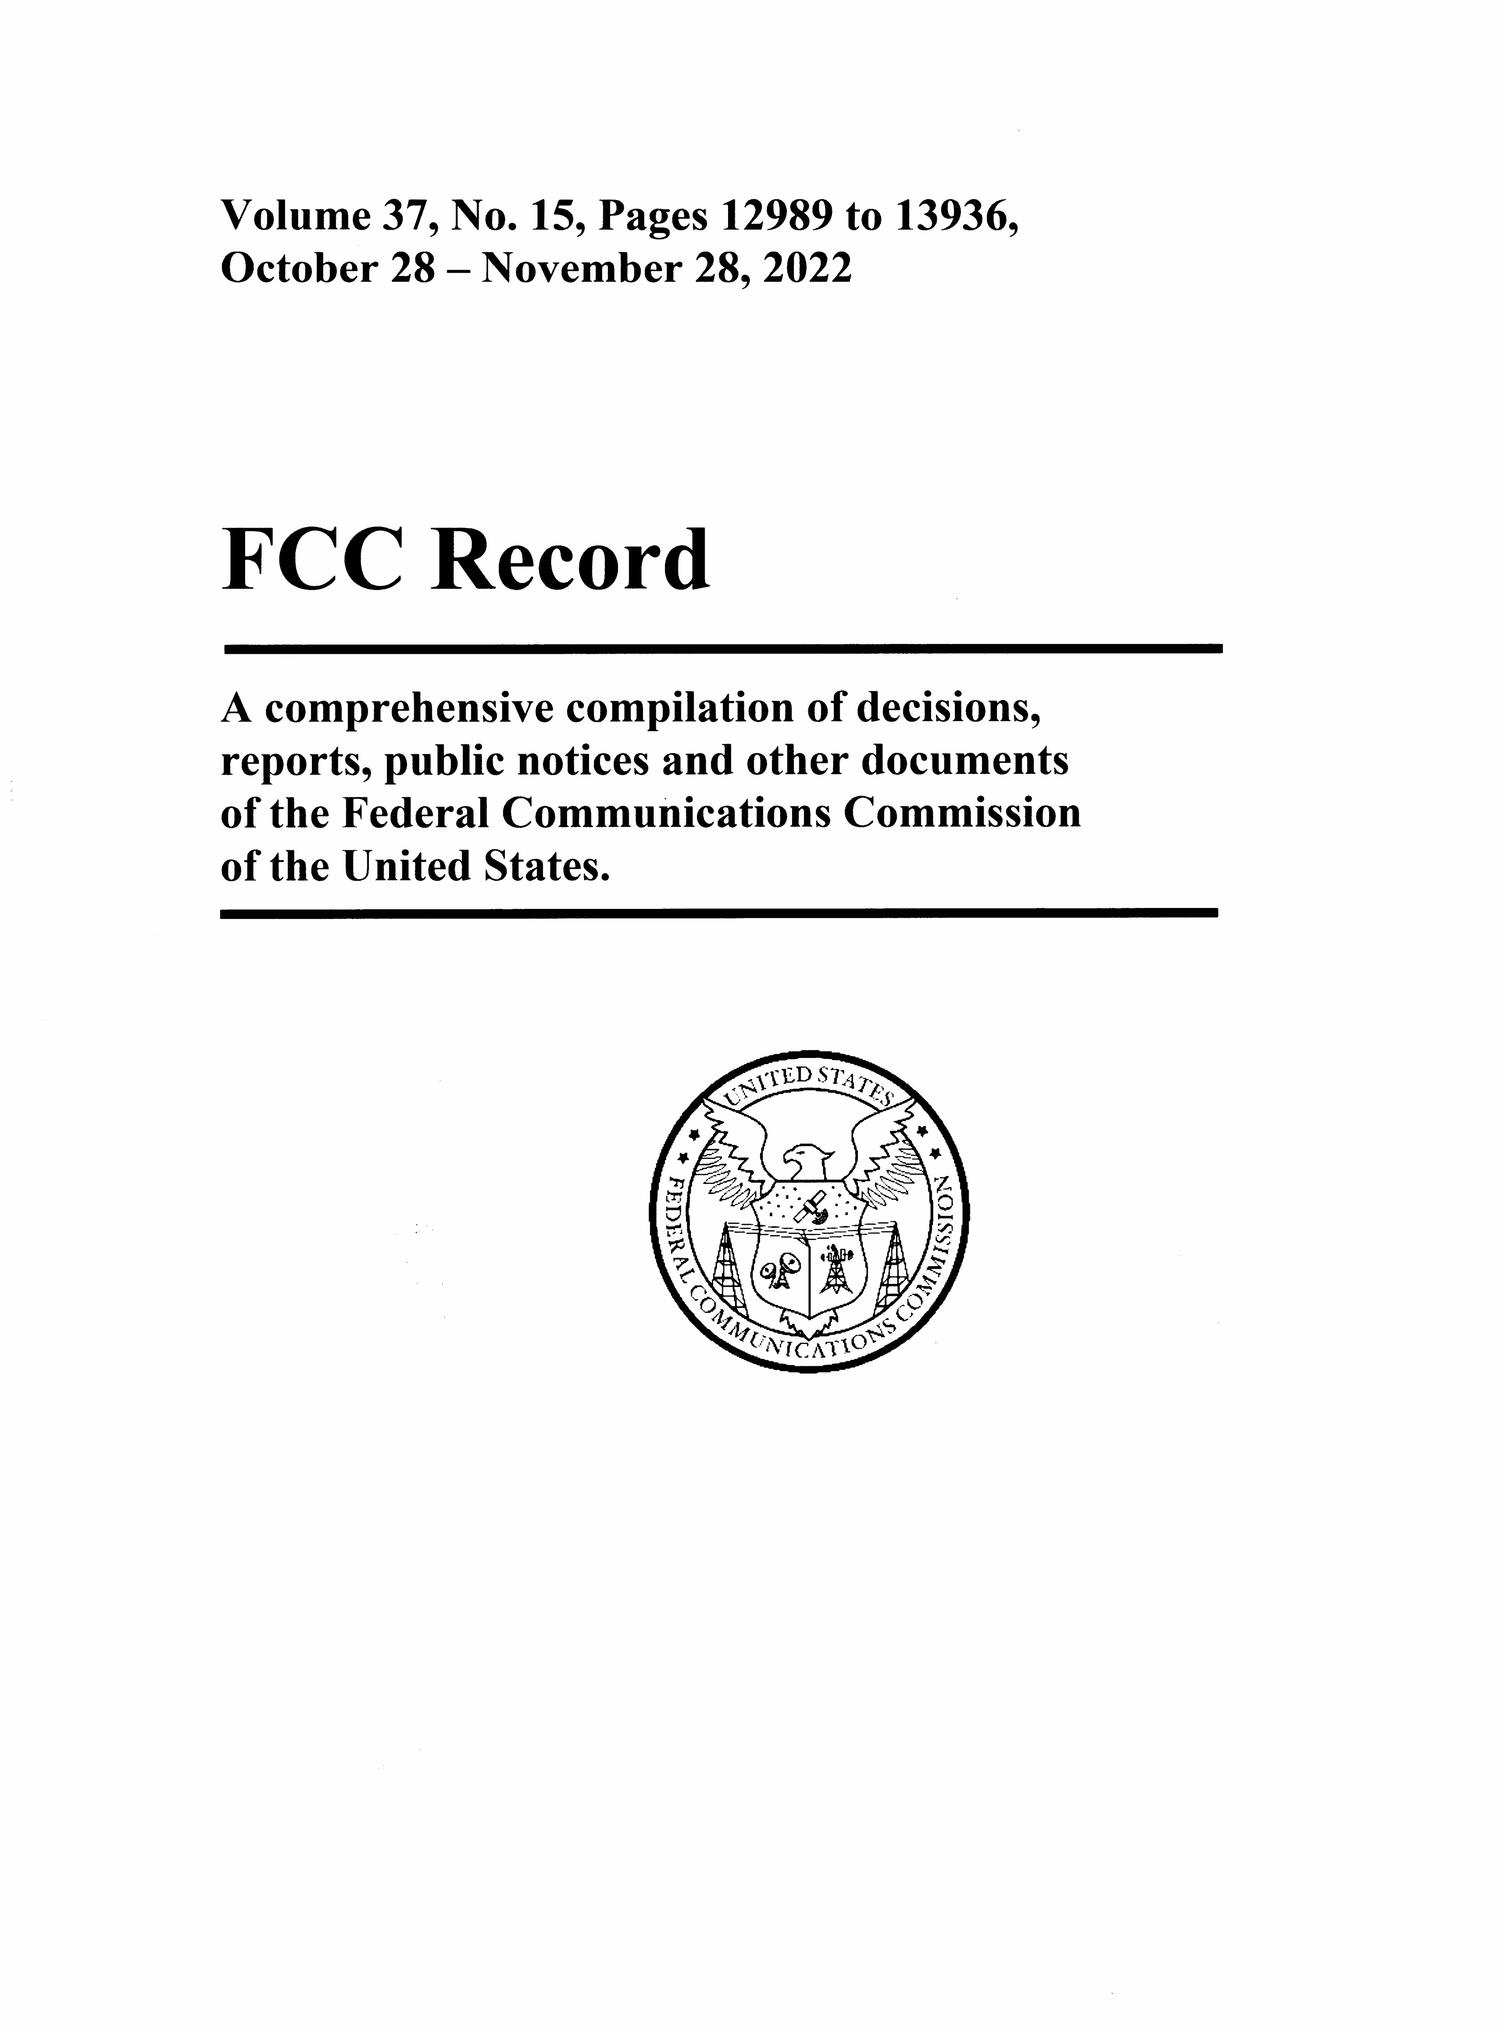 FCC Record, Volume 37, No. 15, Pages 12989 to 13936 October 28 - November 28, 2022
                                                
                                                    Front Cover
                                                